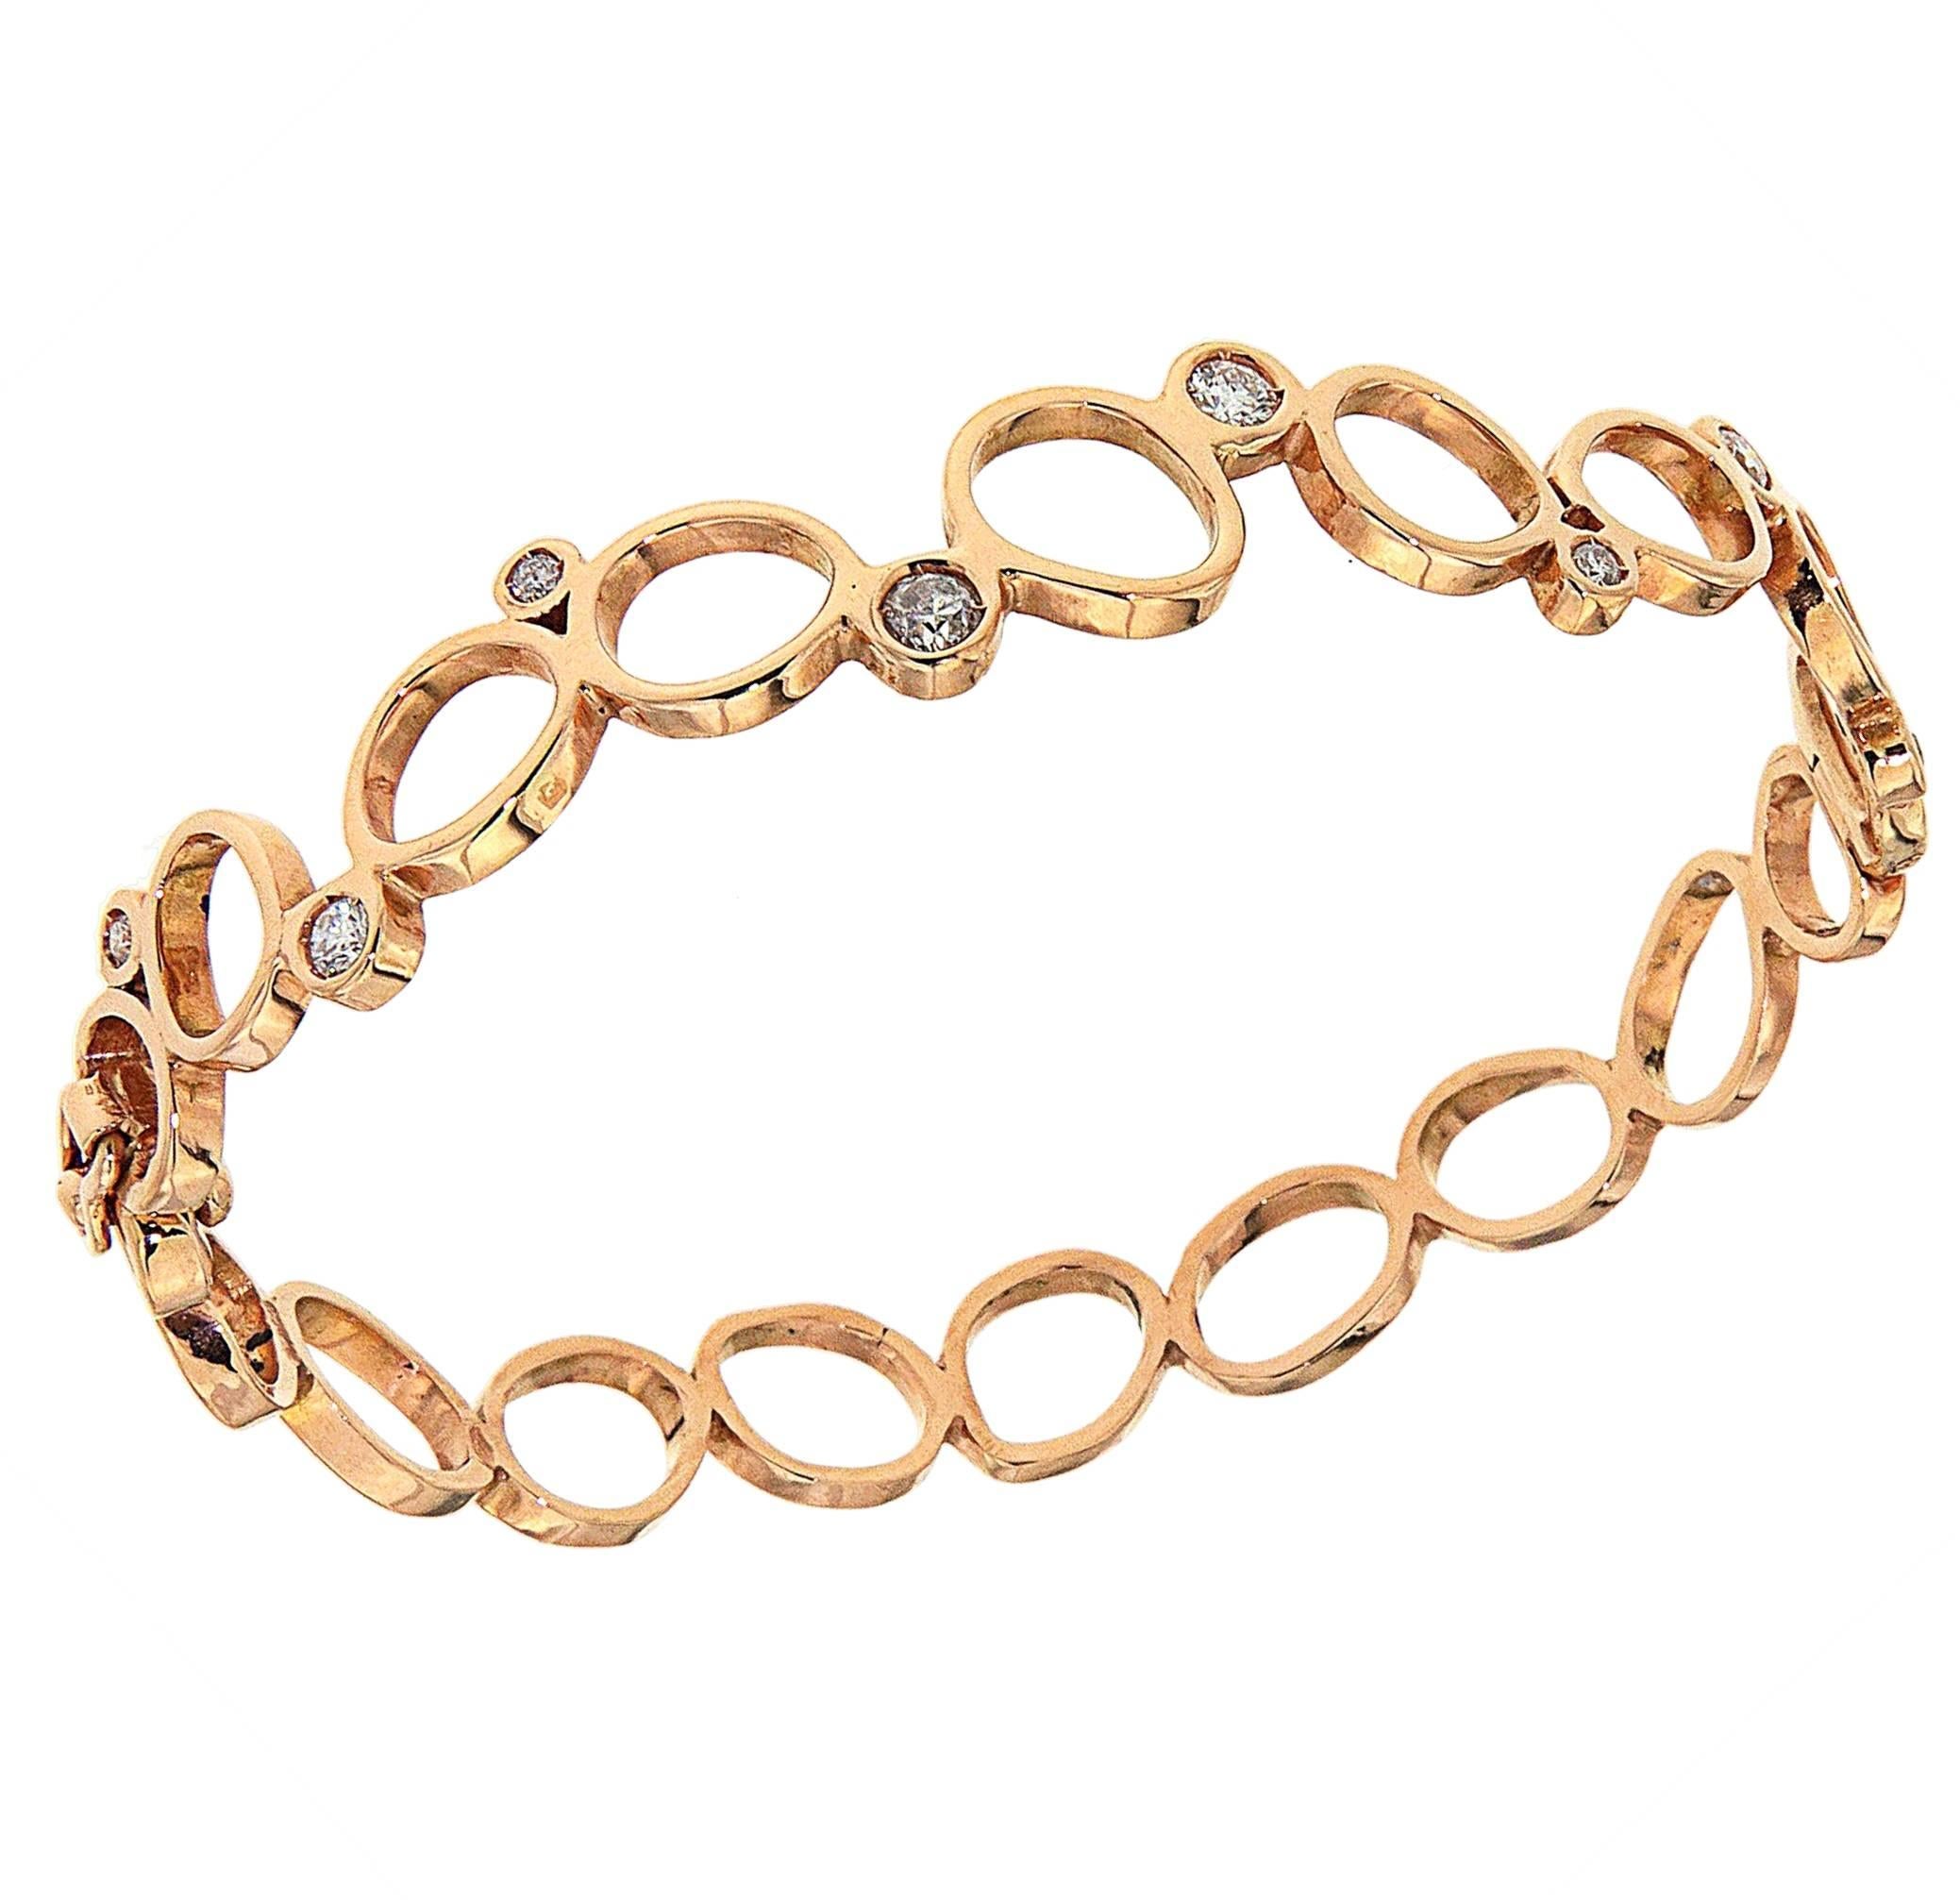 The Rigid Rose Bubbles Bracelet by Italian design house, Botta Gioielli, is a part of their Bubble collection, which is inspired by the sheen which reflects off of small and large bubbles. Refined in composition, the Rigid Rose Bubbles Bracelet